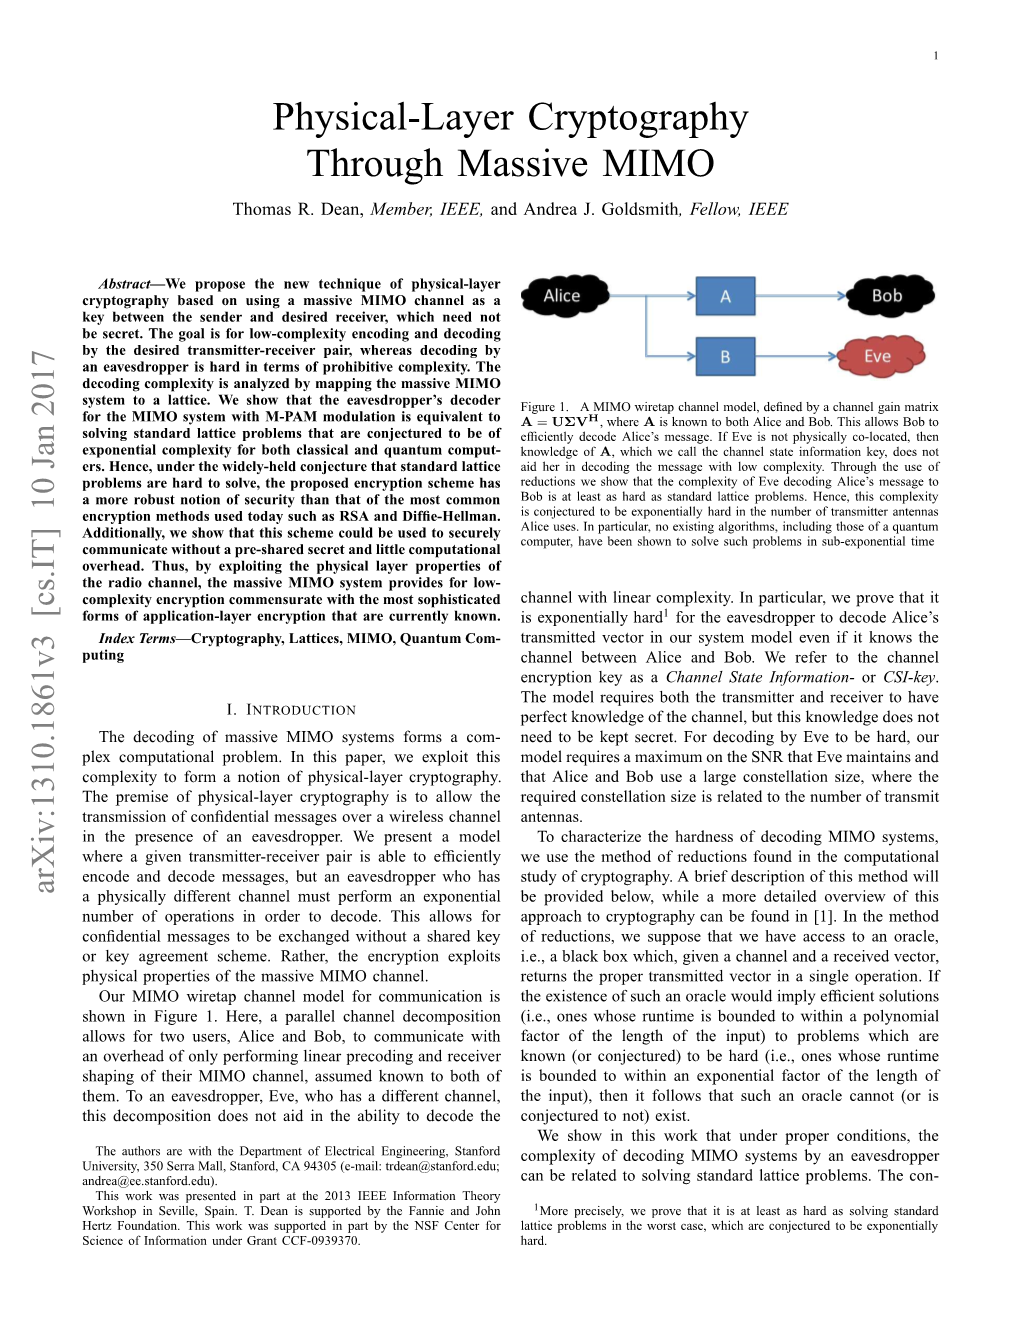 Physical-Layer Cryptography Through Massive MIMO